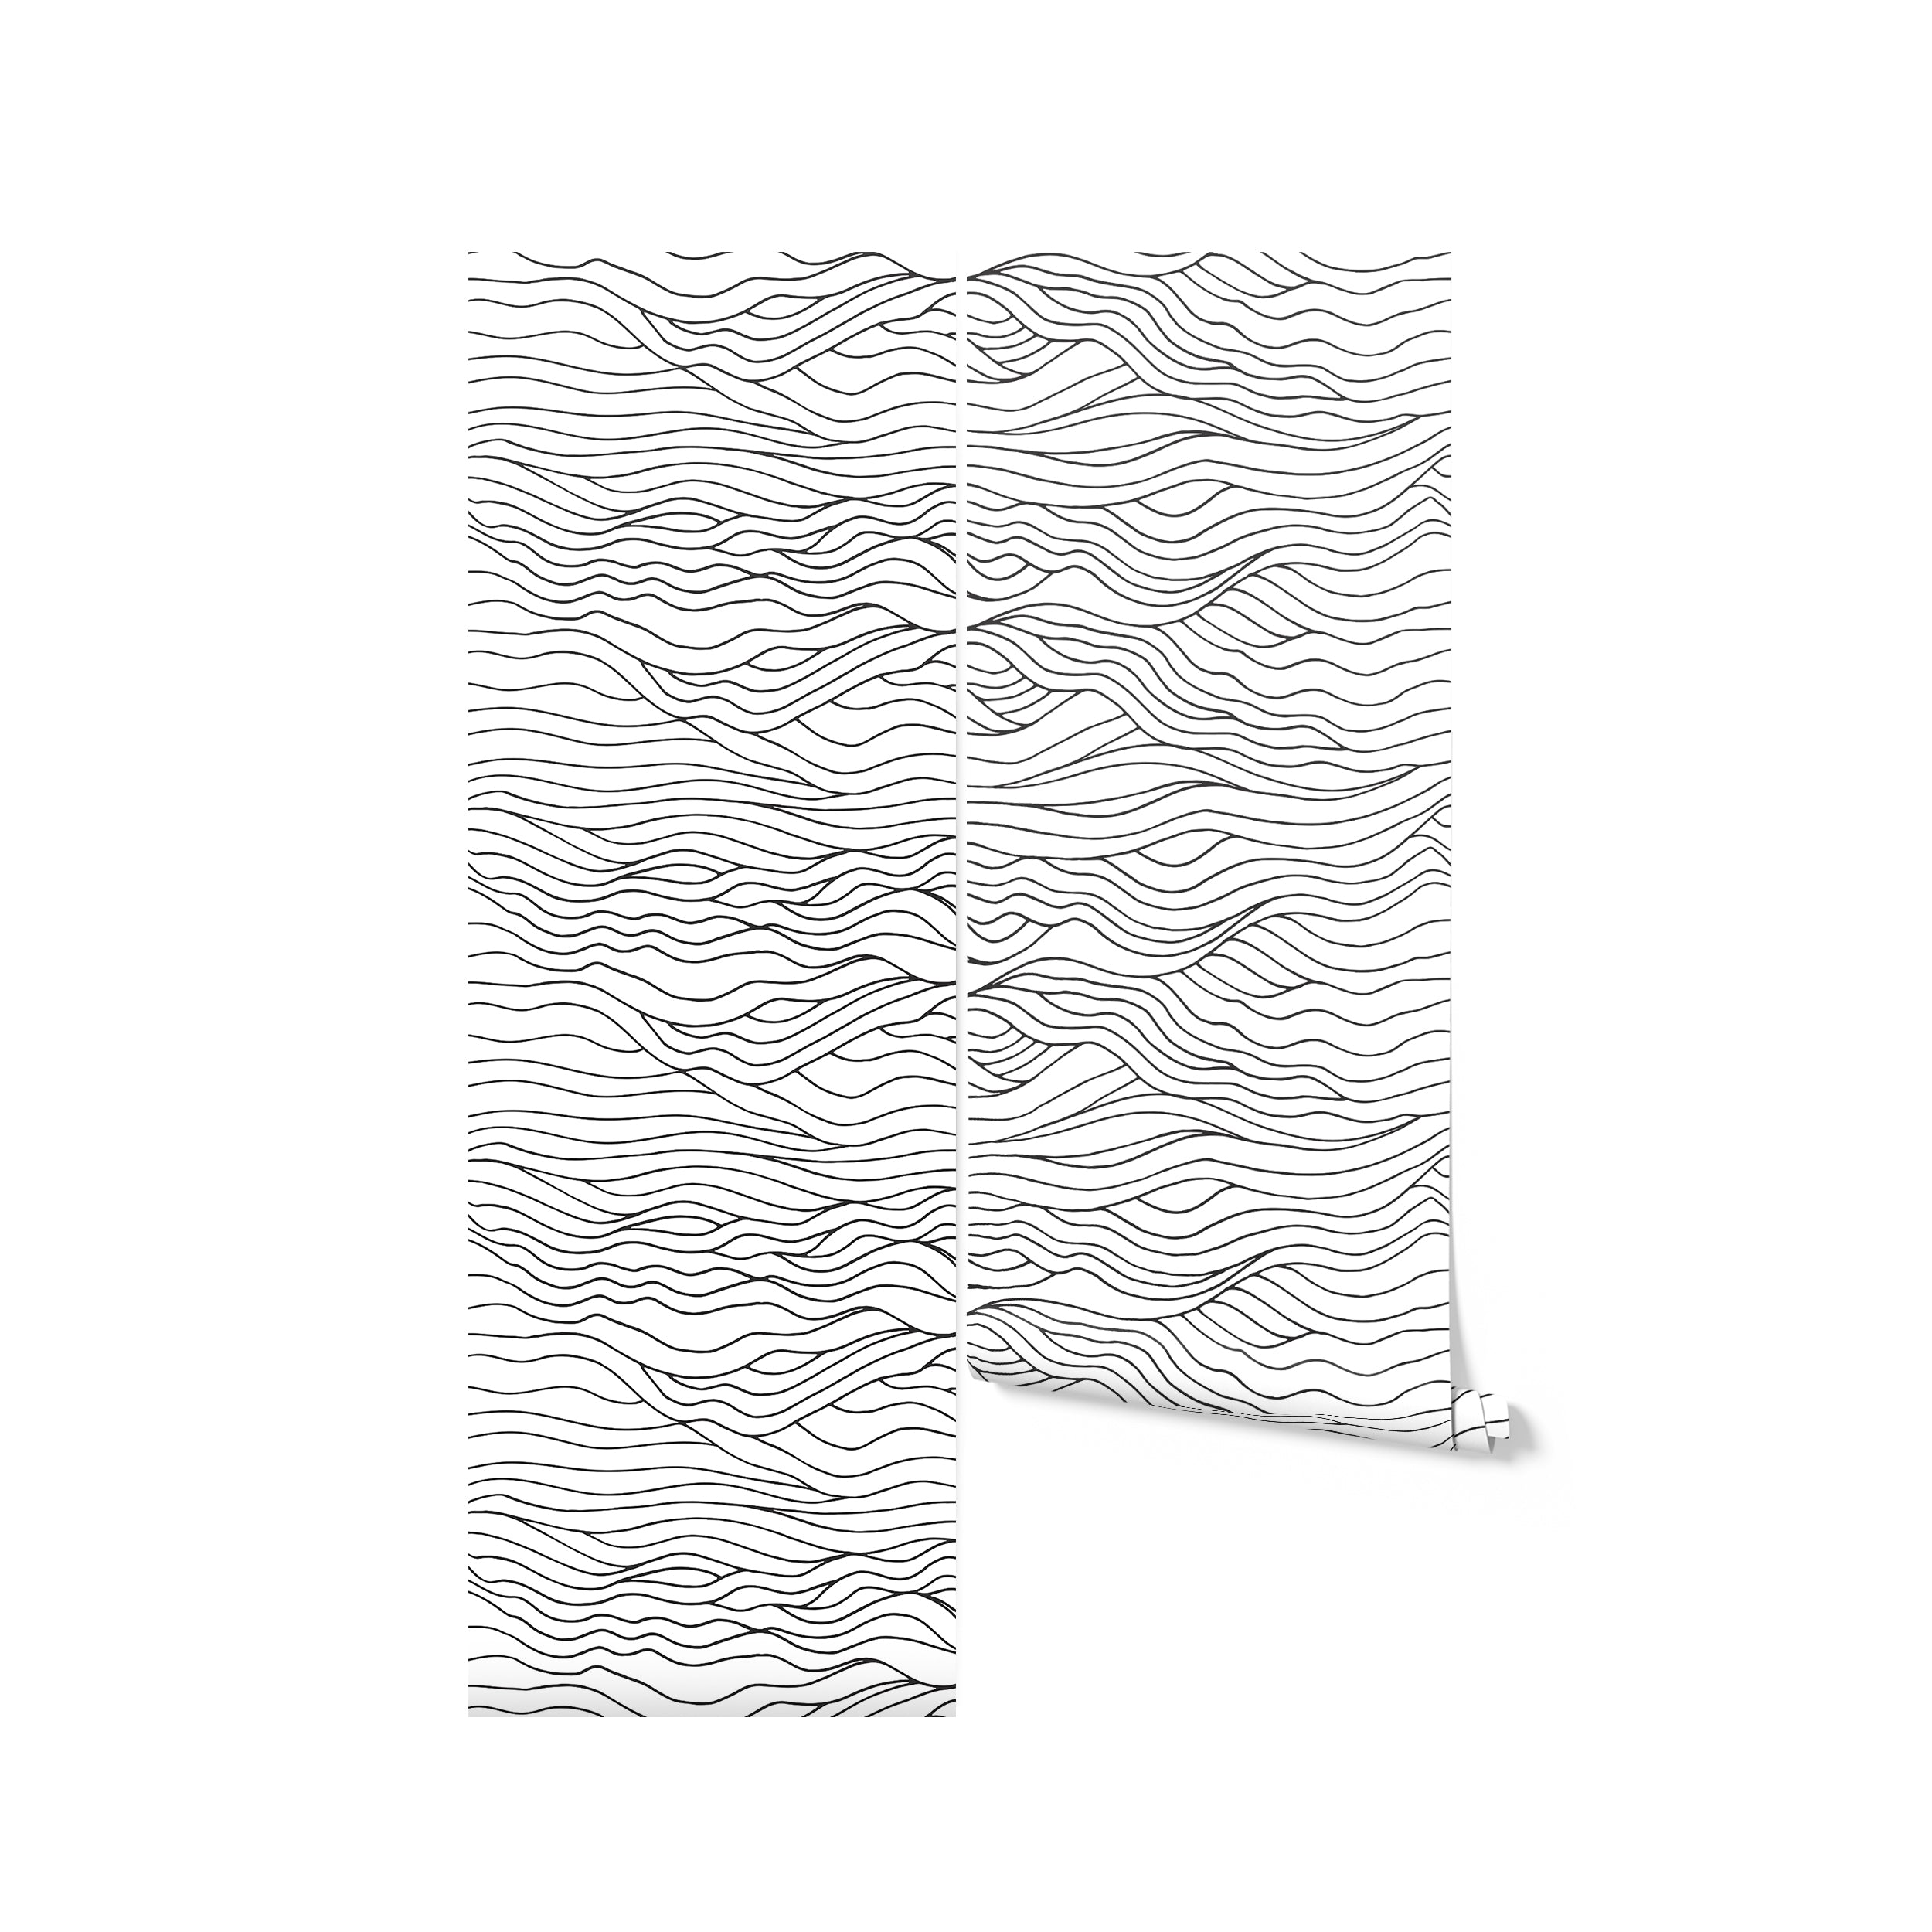 A roll of Modern Line Abstract Wave Wallpaper, displaying its continuous pattern of black wavy lines on a white background, ready to bring a touch of modern elegance to any room.